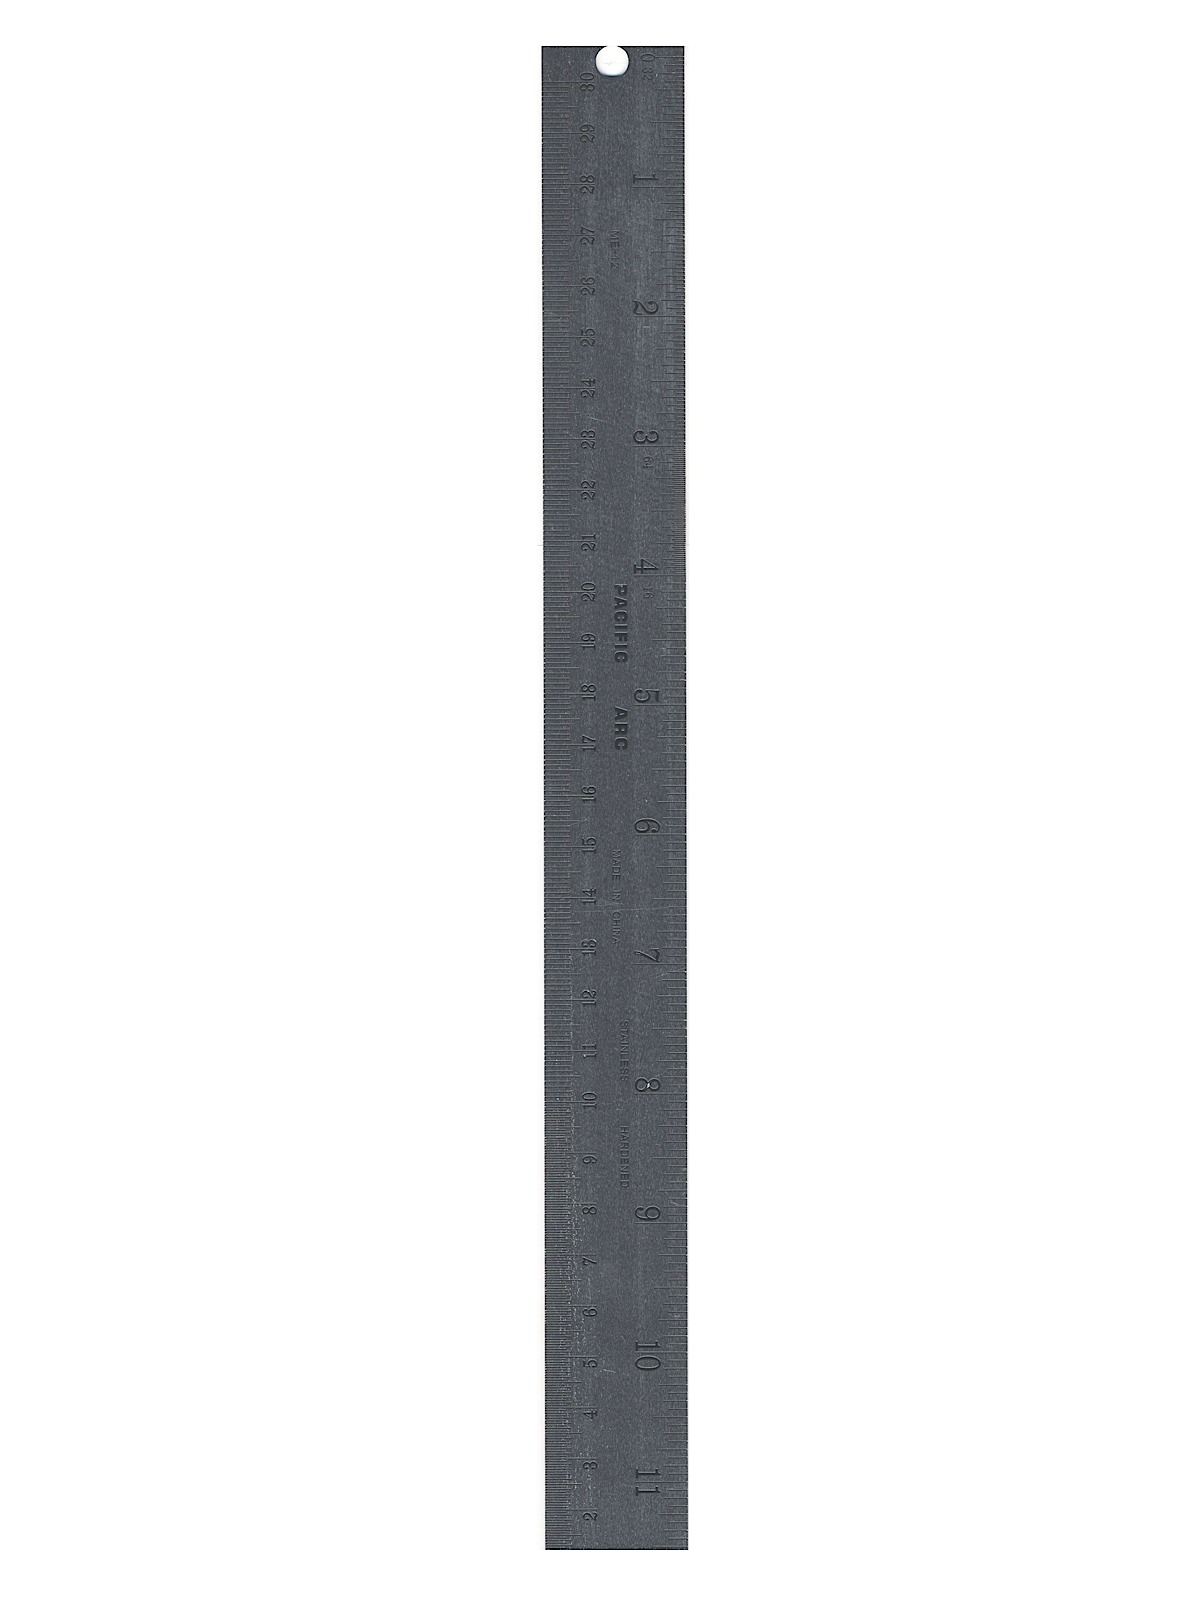 Stainless Steel Non-Slip Rulers - 16th Inch Metric 12 In.